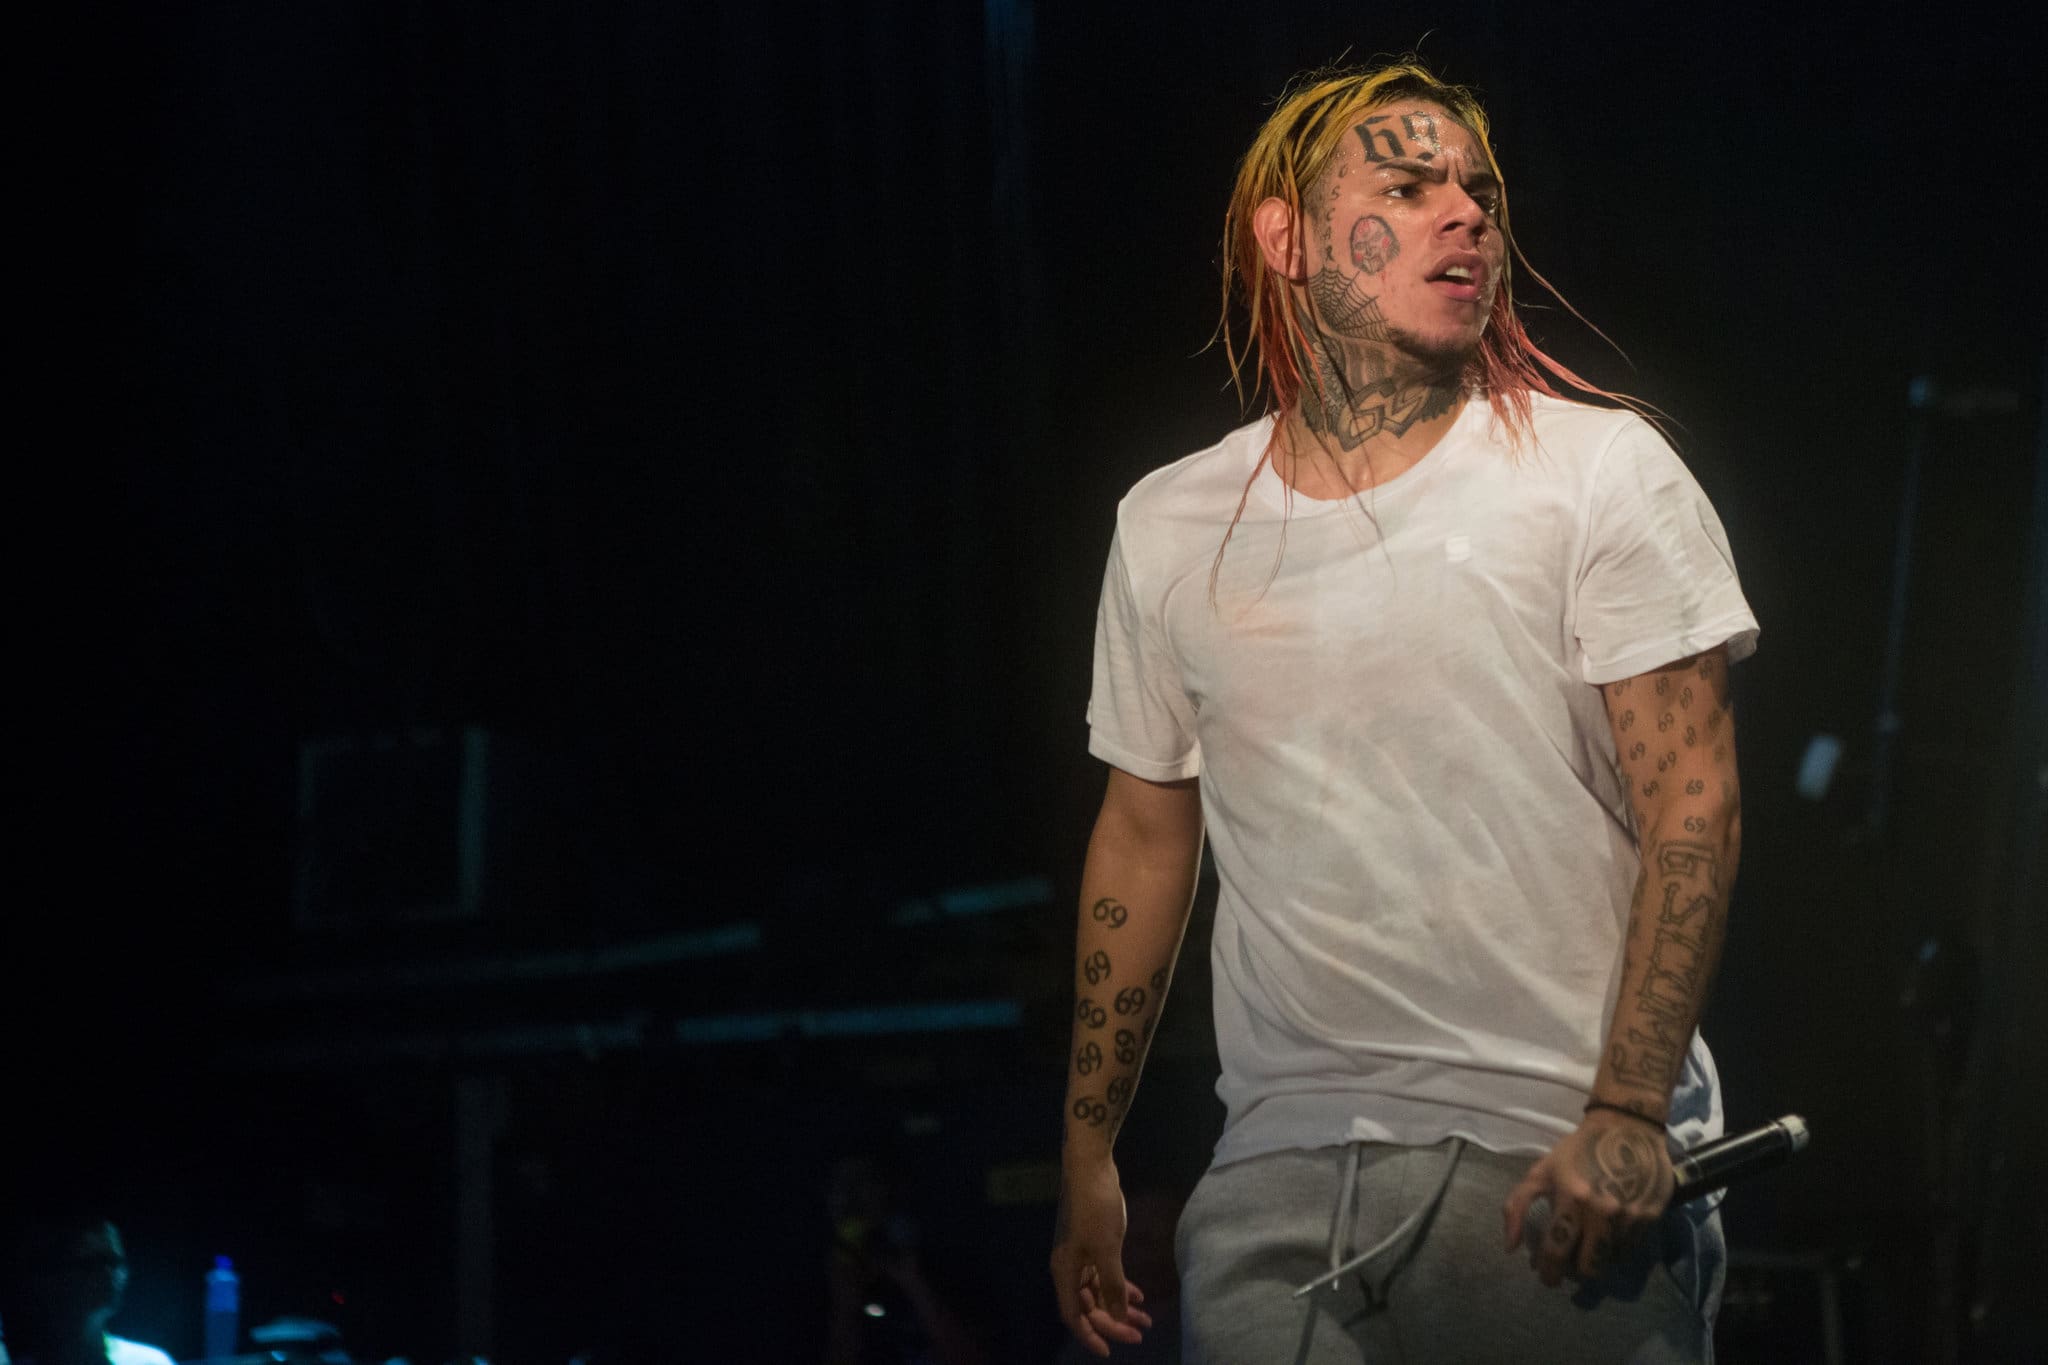 Tekashi 69 Gets His Sentence: He Will Serve 24 Months In Jail And Five Years Of Supervised Release